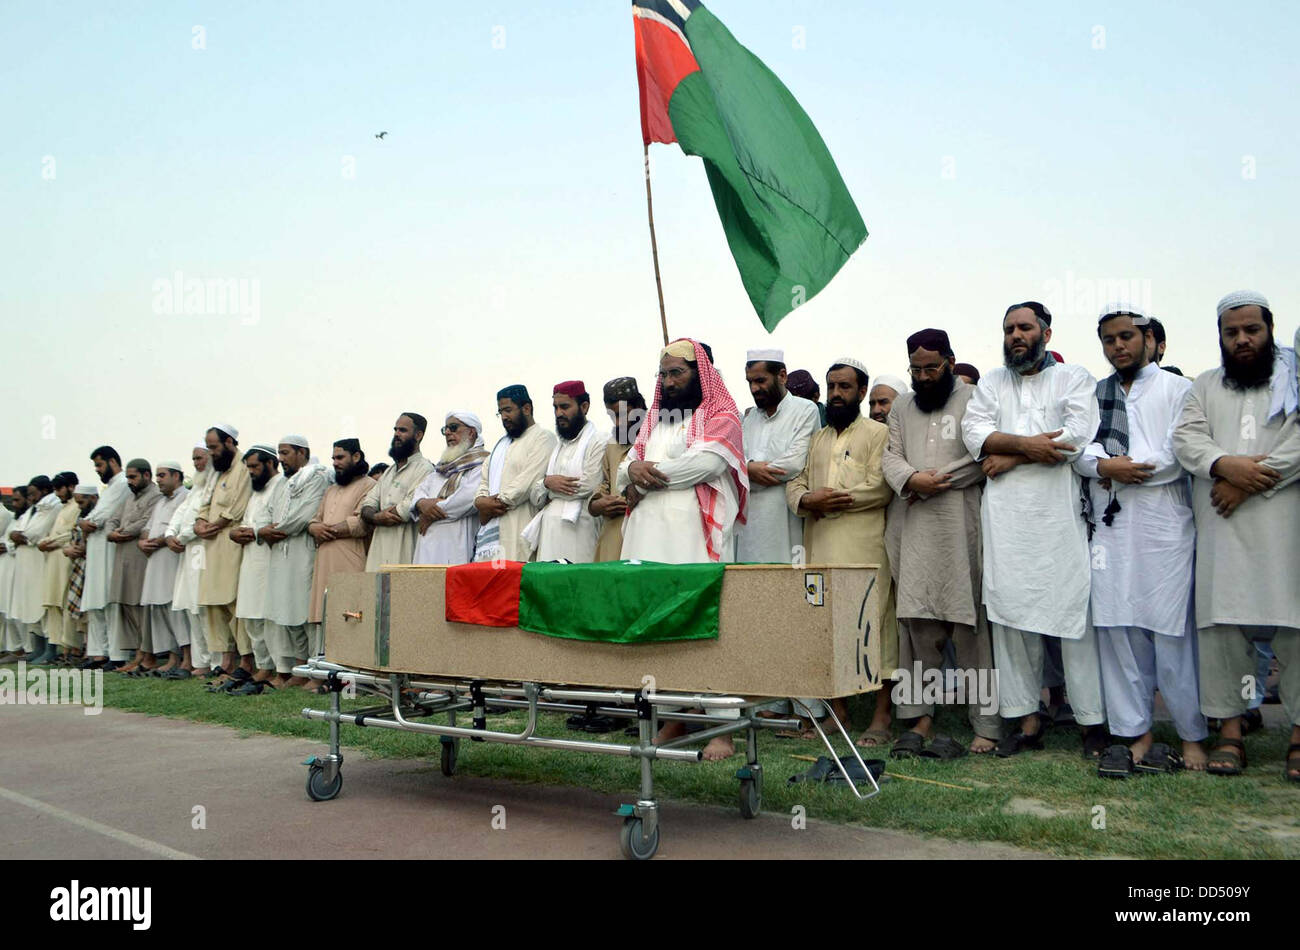 Activists of Ahle Sunnat Wal Jamat offering funeral prayer of their leader and spokesman, Akbar Saeed Farooqi who gunned down by unidentified gunmen in Gulshan-e-Iqbal on Sunday in Karachi, on Qayyum Stadium in Peshawar on Monday, August 26, 2013. Stock Photo